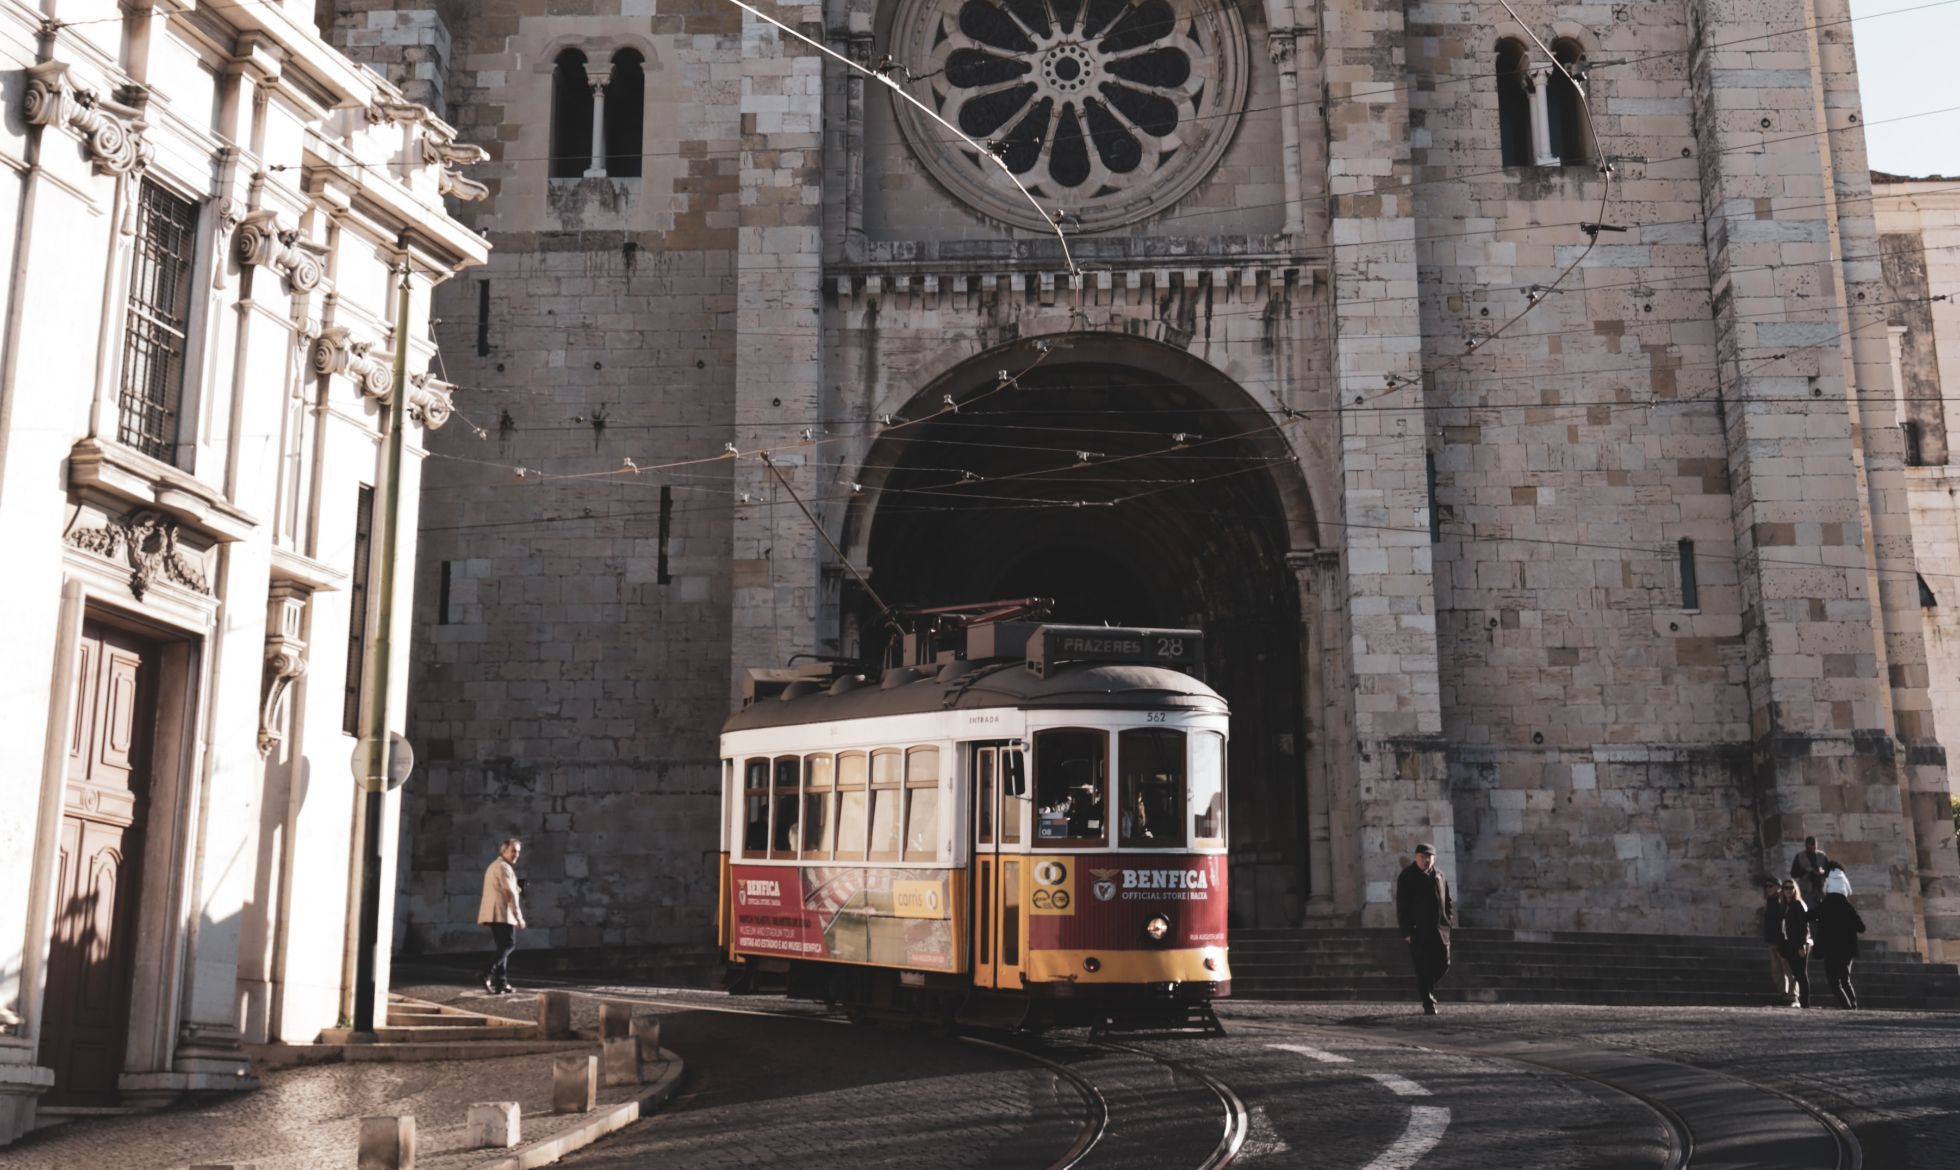 Portugal Golden Visa News - is this the end?